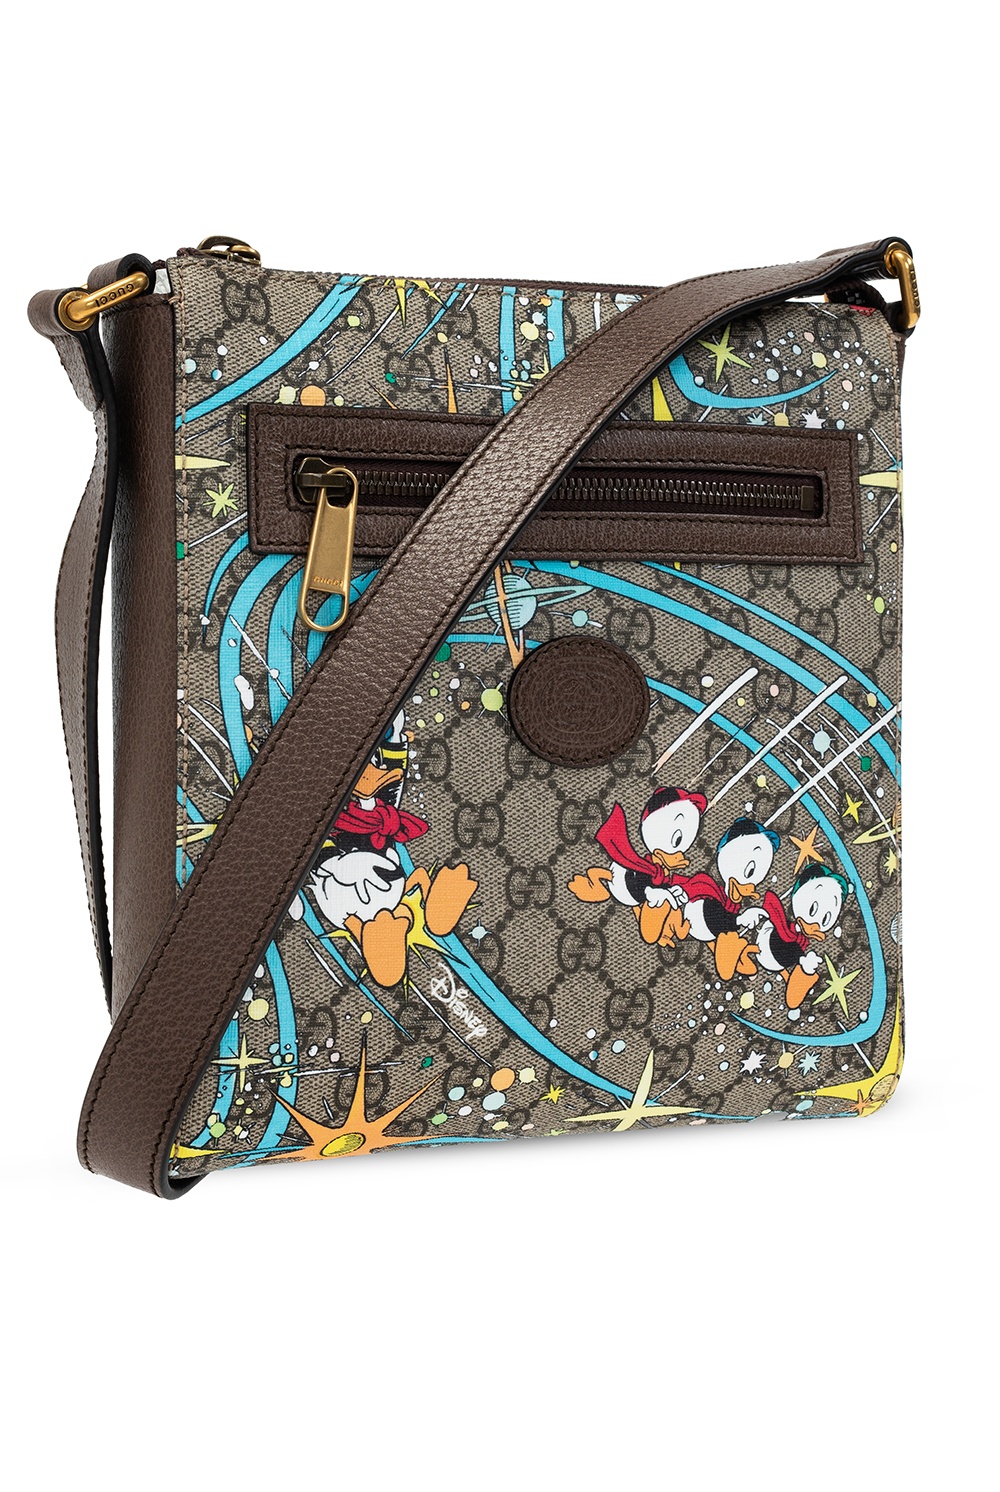 61 DISNEY x GUCCI BAGS COLLECTION ideas